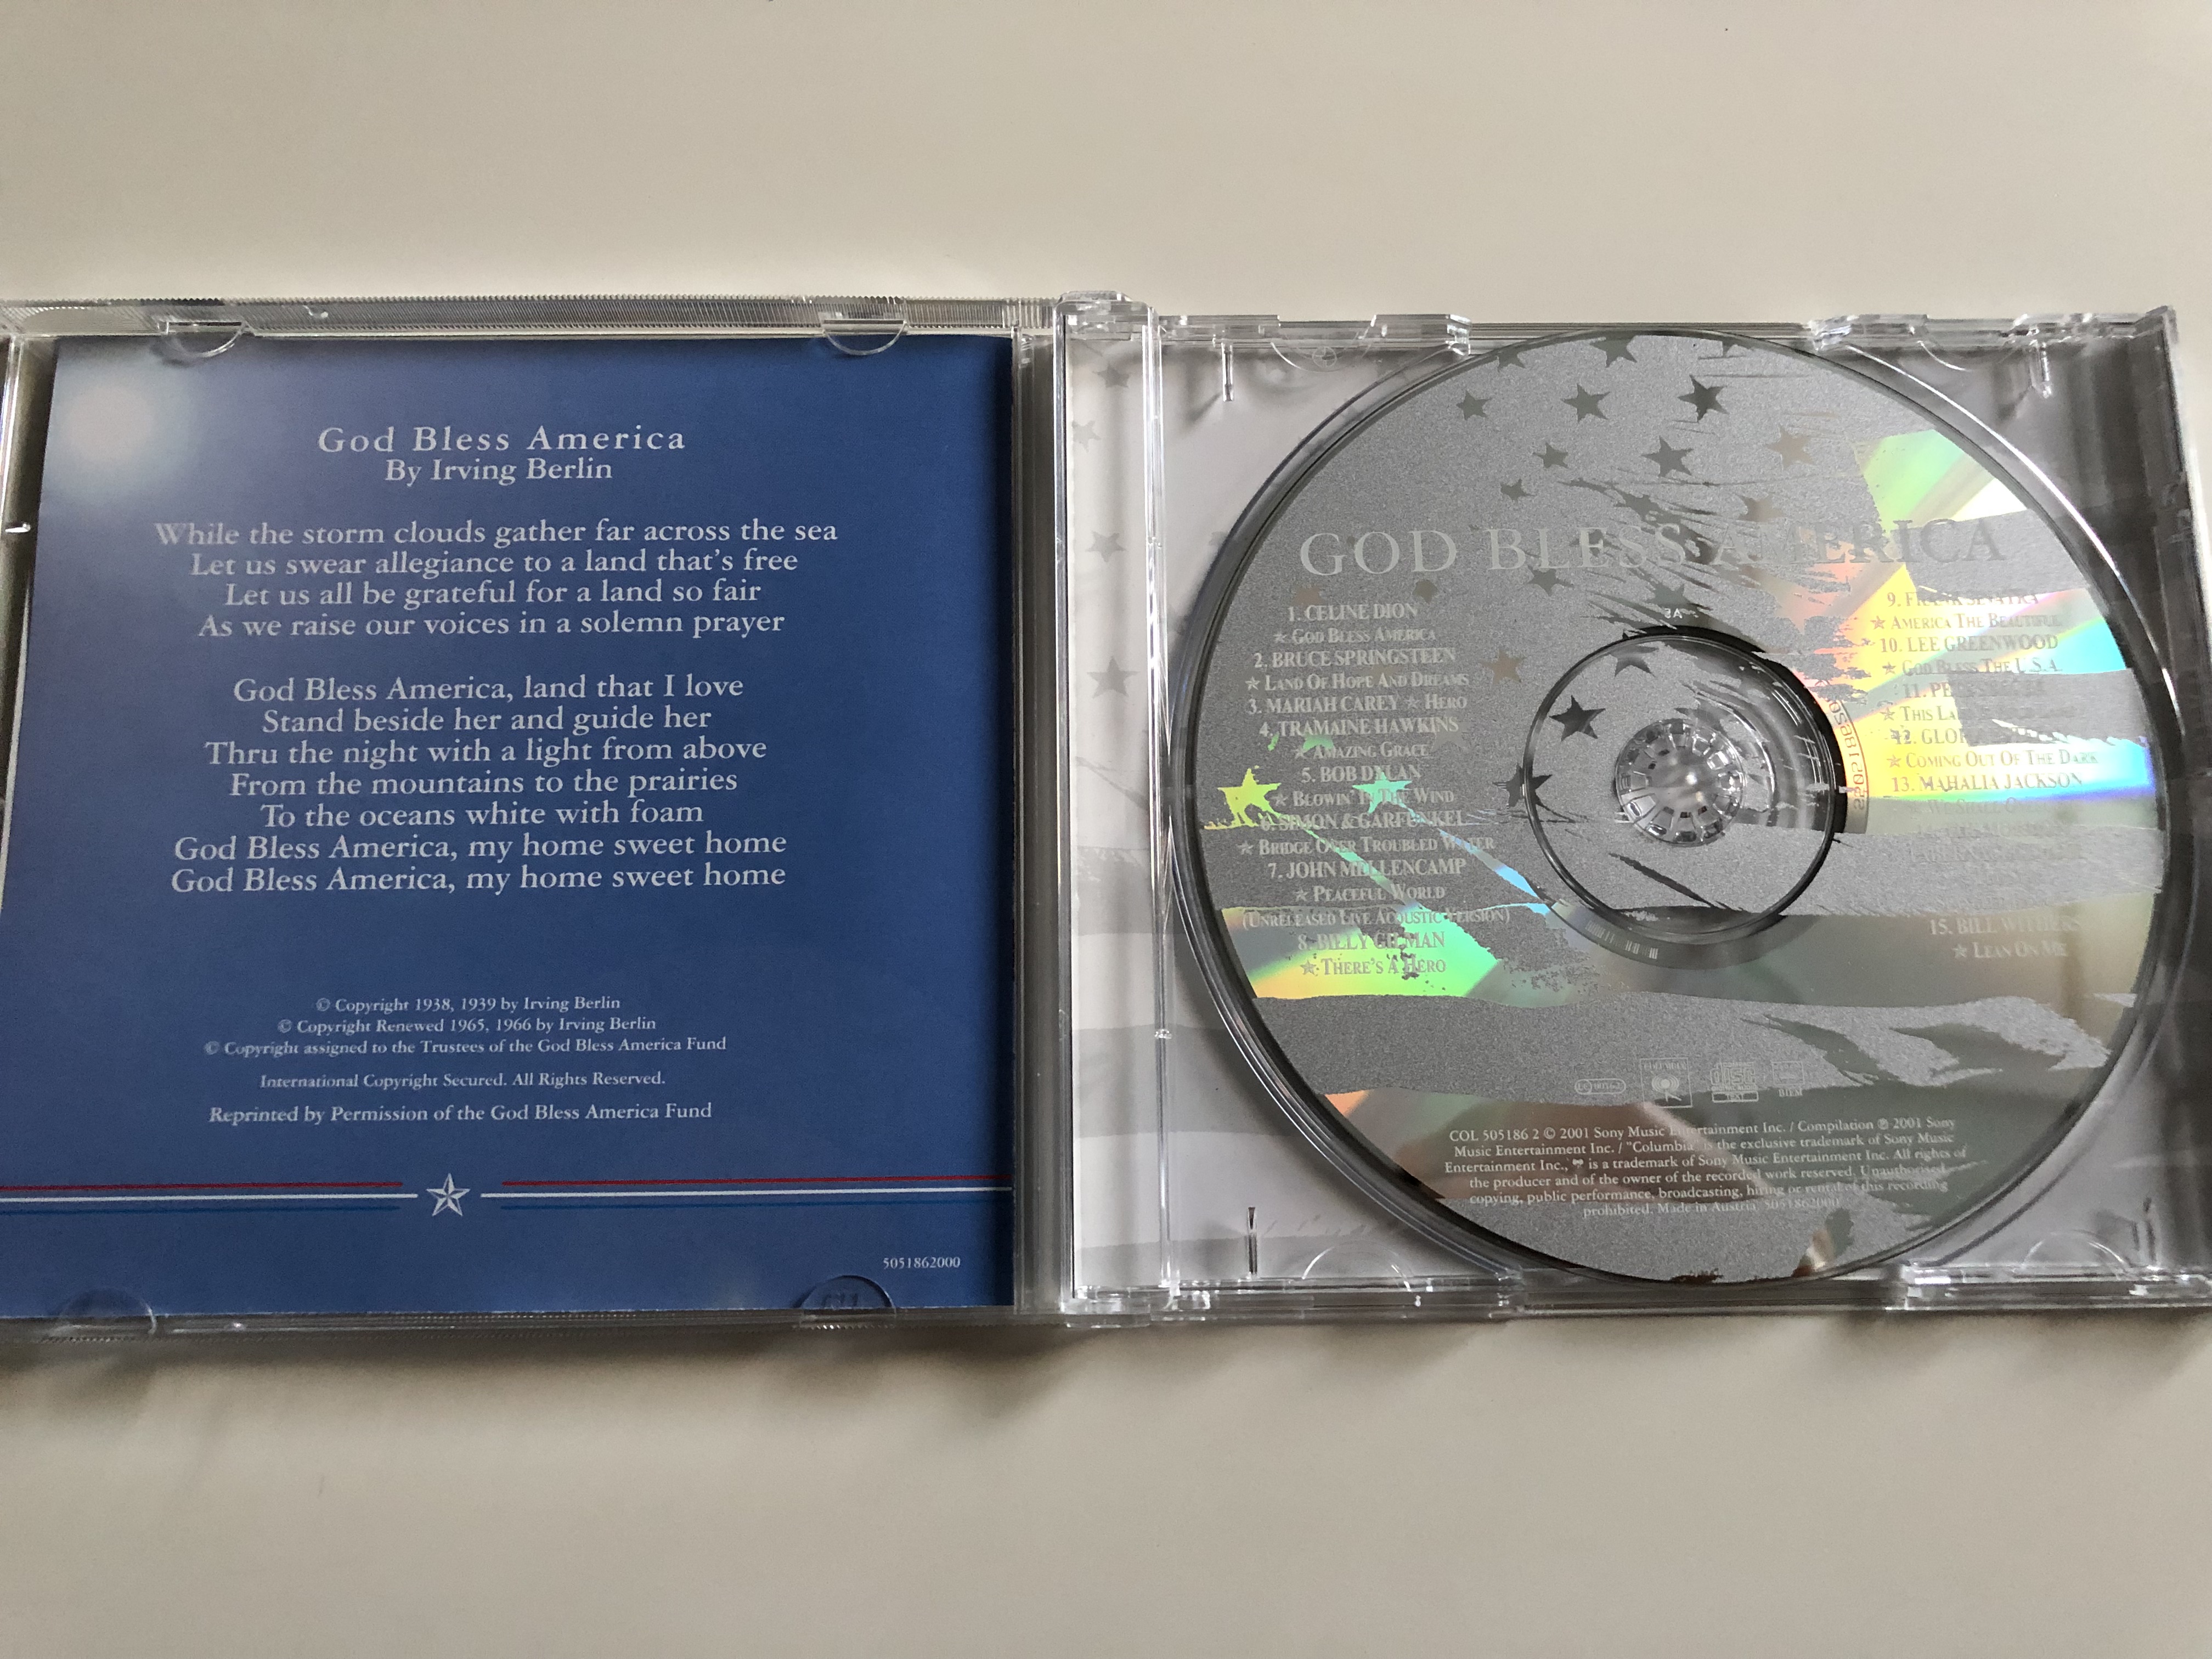 god-bless-america-mariah-carey-celine-dion-bob-dylan-simon-garfunkel-frank-sinatra-bill-withers-for-the-benefit-of-the-twin-towers-fund-audio-cd-2001-col-5051862-3-.jpg